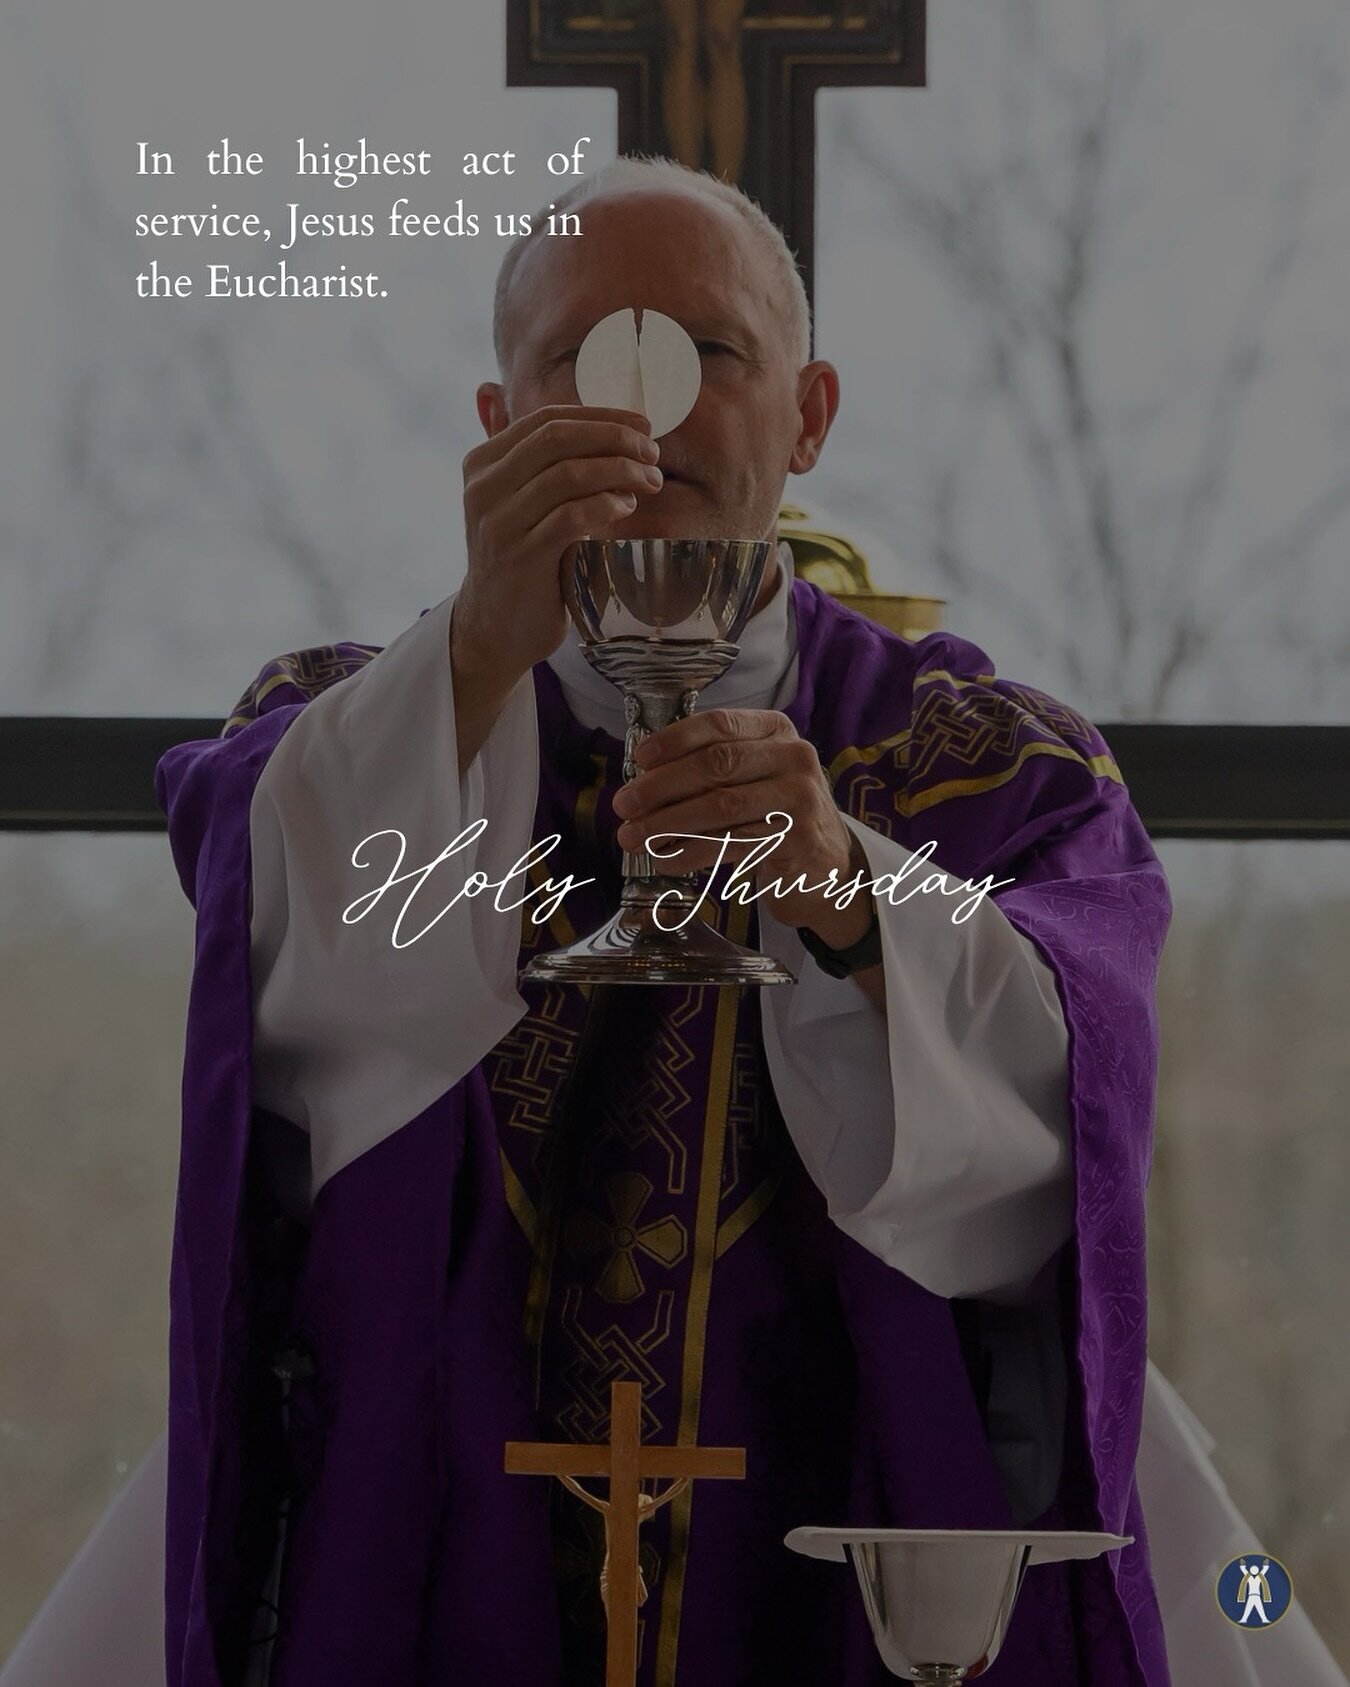 𝘏𝘰𝘭𝘺 𝘛𝘩𝘶𝘳𝘴𝘥𝘢𝘺 | We thank Jesus for the Eucharist and the ministerial priesthood, at the heart of which is sacrificial service. Both were &ldquo;born&rdquo; during the Last Supper and both are indelibly connected.

Tonight, Jesus would hav